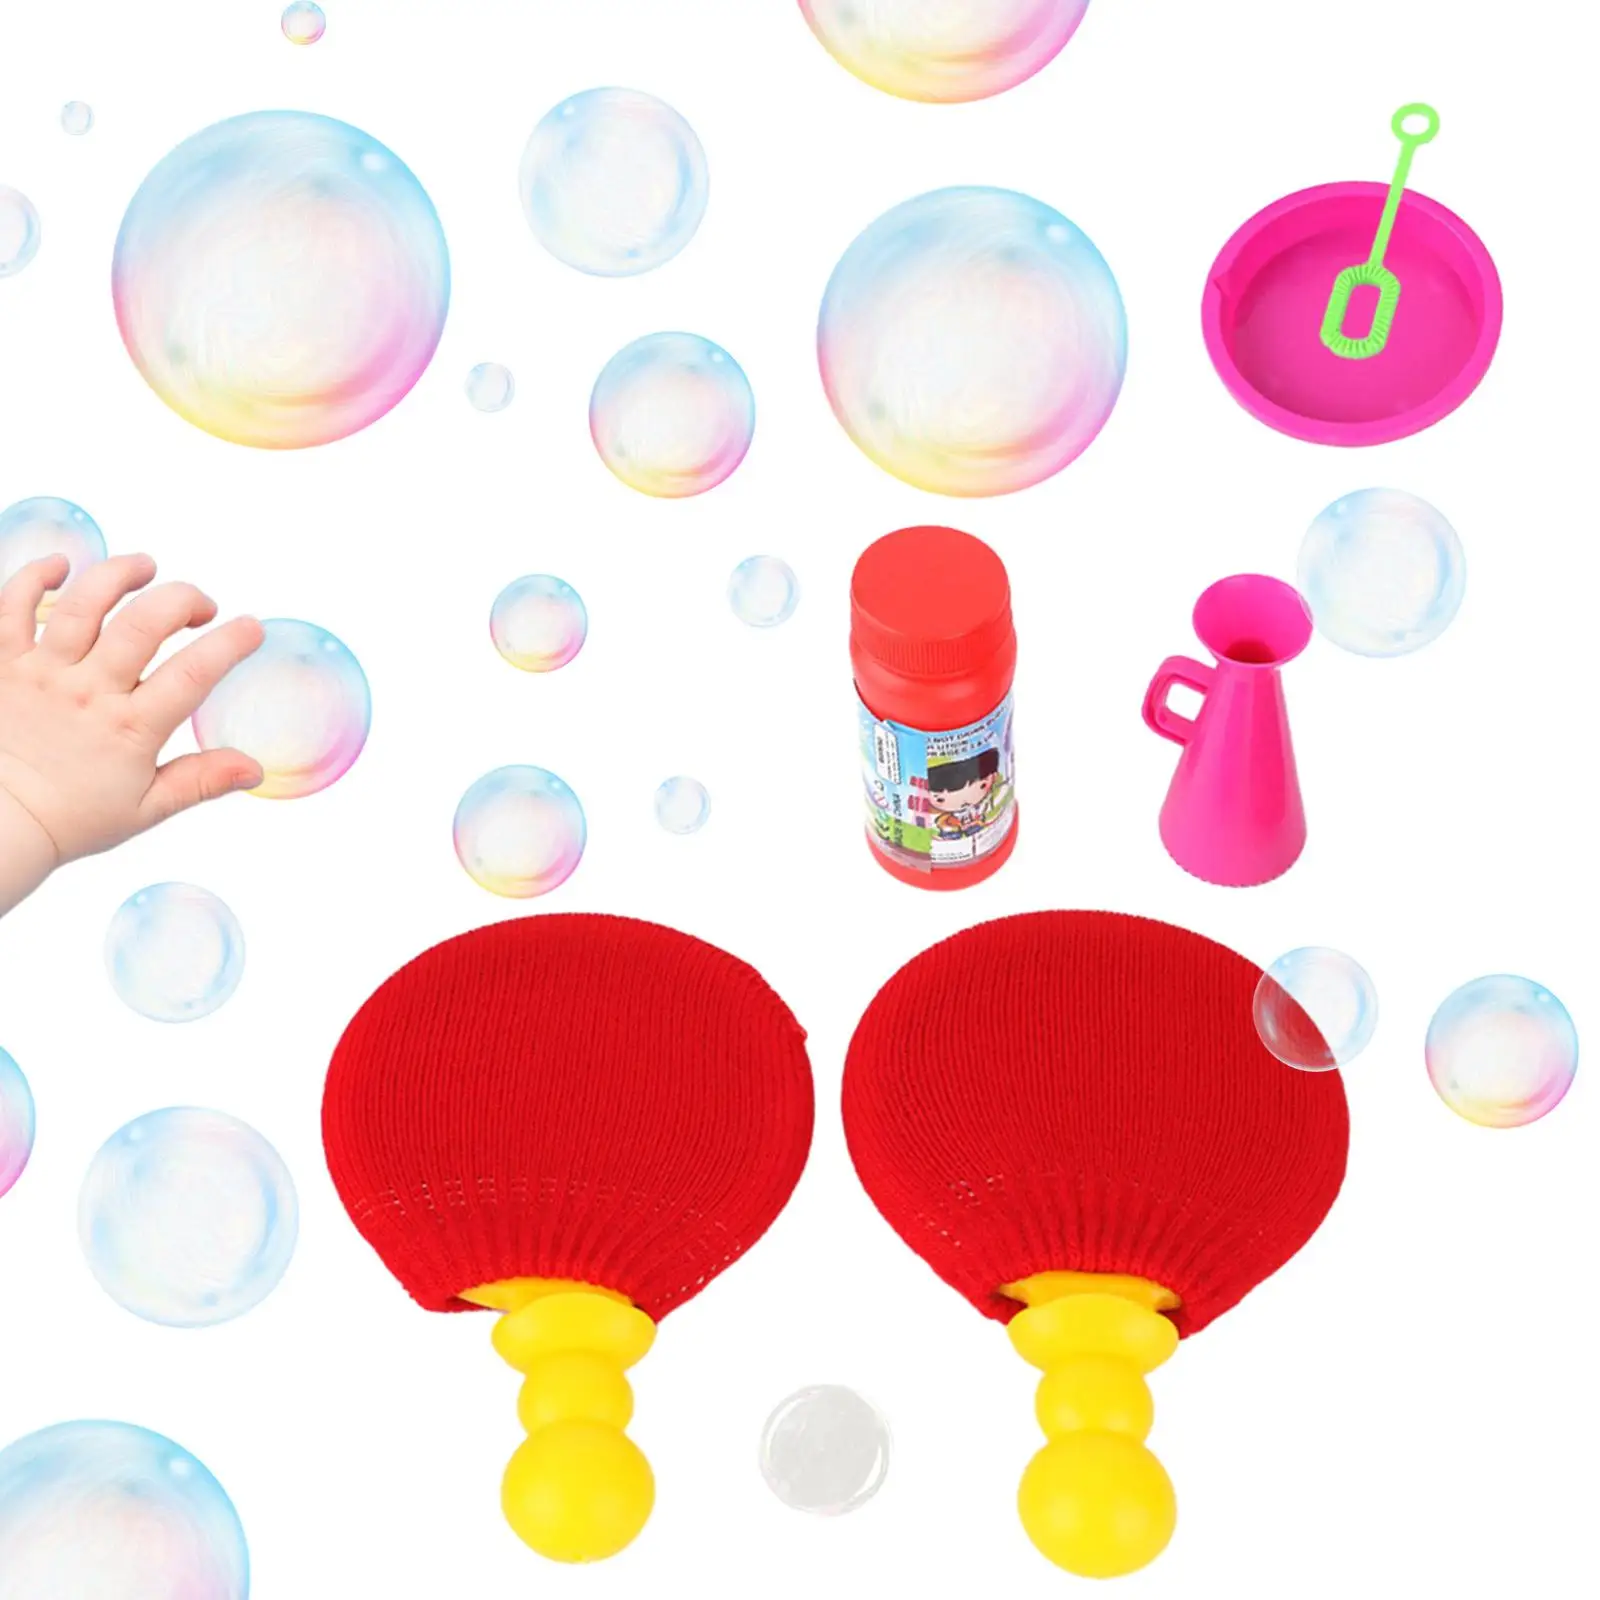 Touchable Bouncing Bubble Kits Indoor and Outdoor Bubble Maker Set Toys for Girls Boys Toddlers Children Kids Great Gift